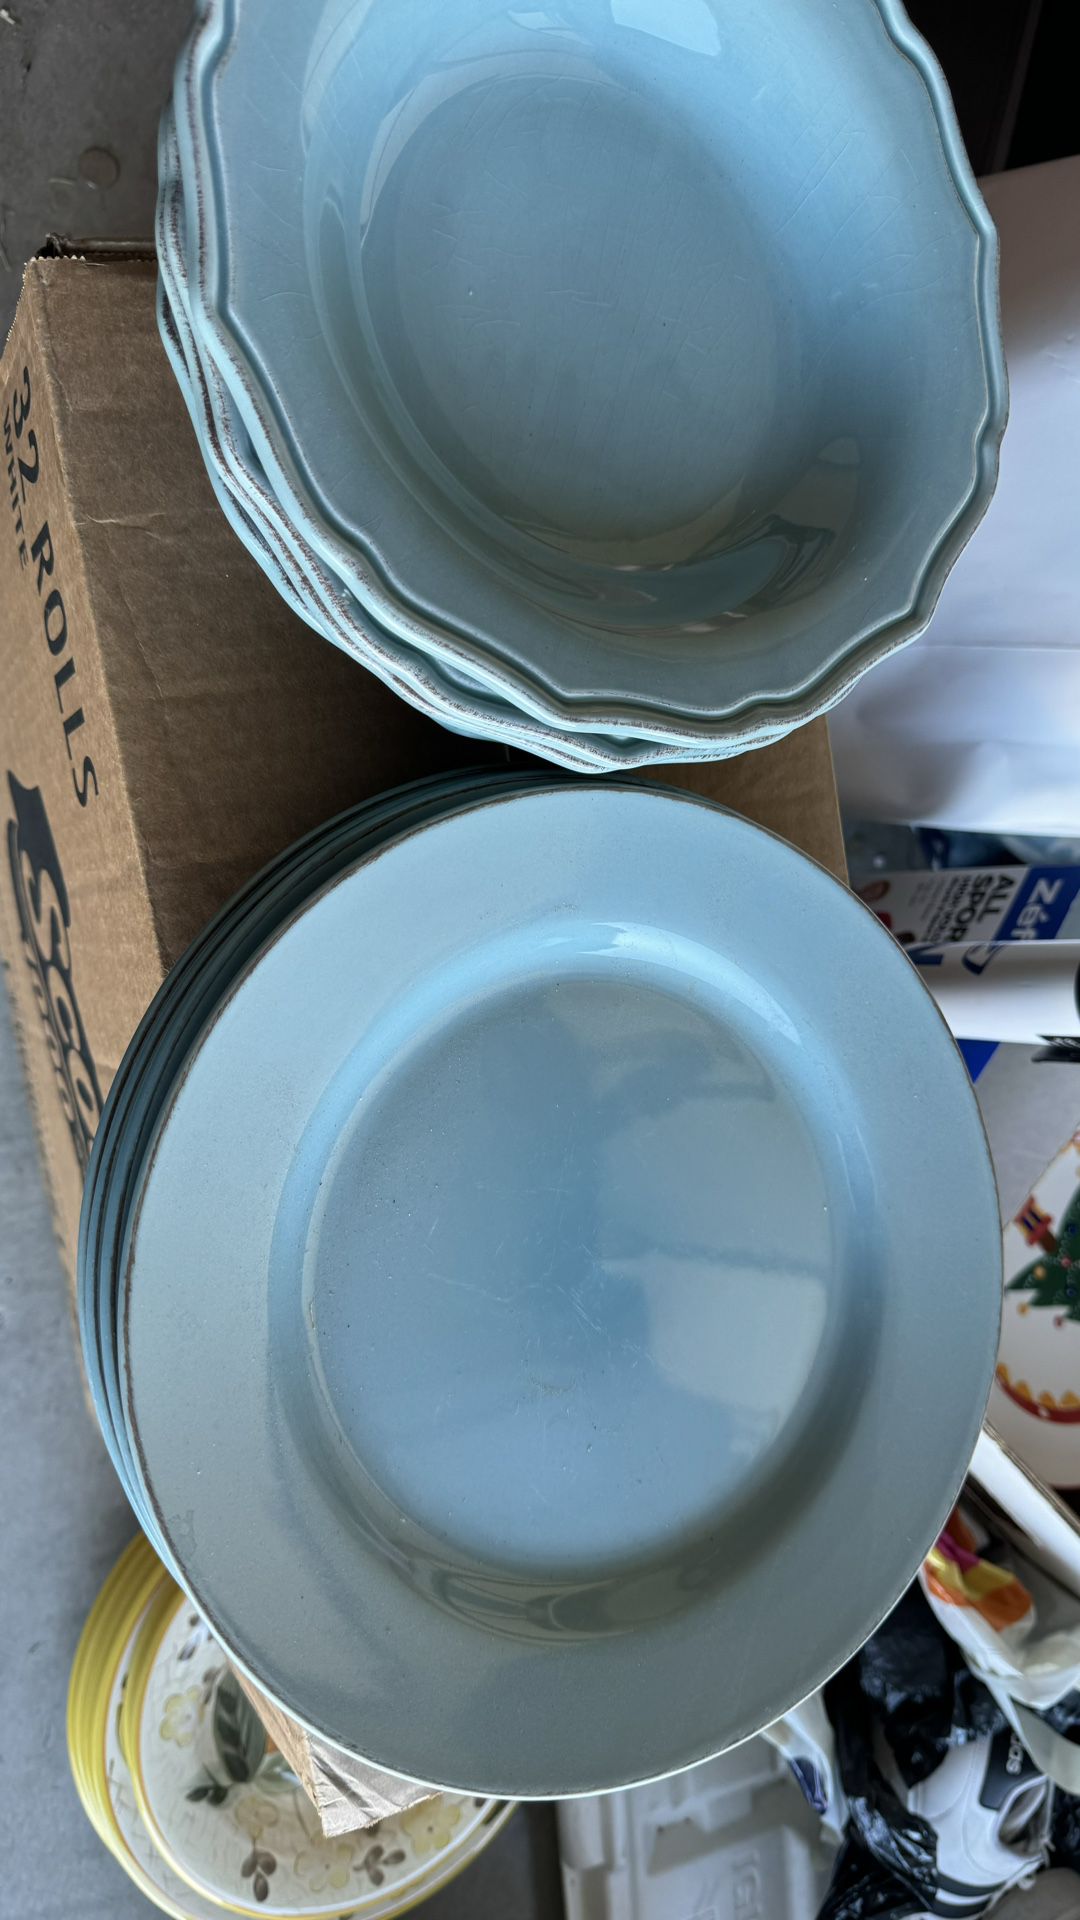 The seller plates and bowls for plates or bowls, Macy’s brand